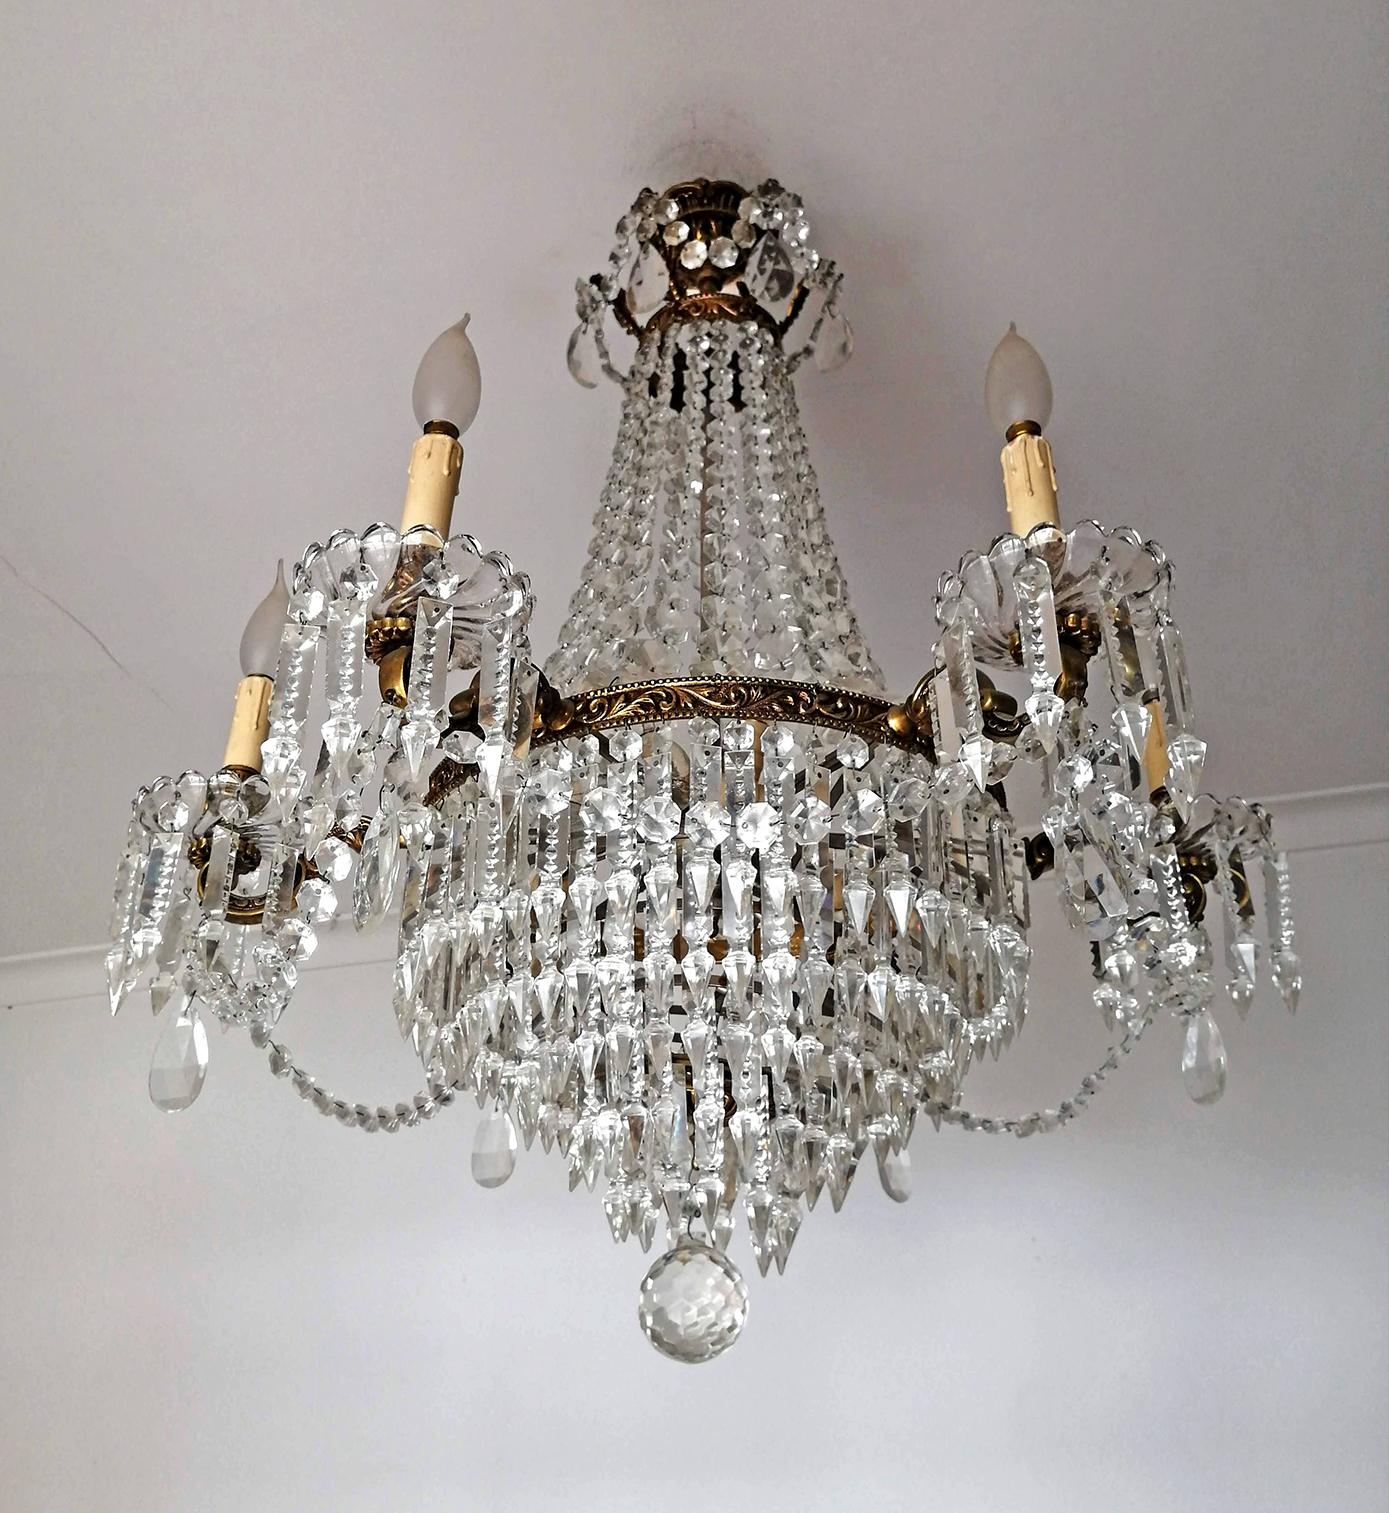 Impressive 12-light French Empire with gilt chiseled bronze frame and pure crystal garlands chandelier.
Measures:
Diameter 27.5 in/ 70 cm
Height 35.4 in/ 90 cm
Weight: 55 lb/ 25 Kg
12-light bulbs E14, good working condition
Assembly required. Bulbs